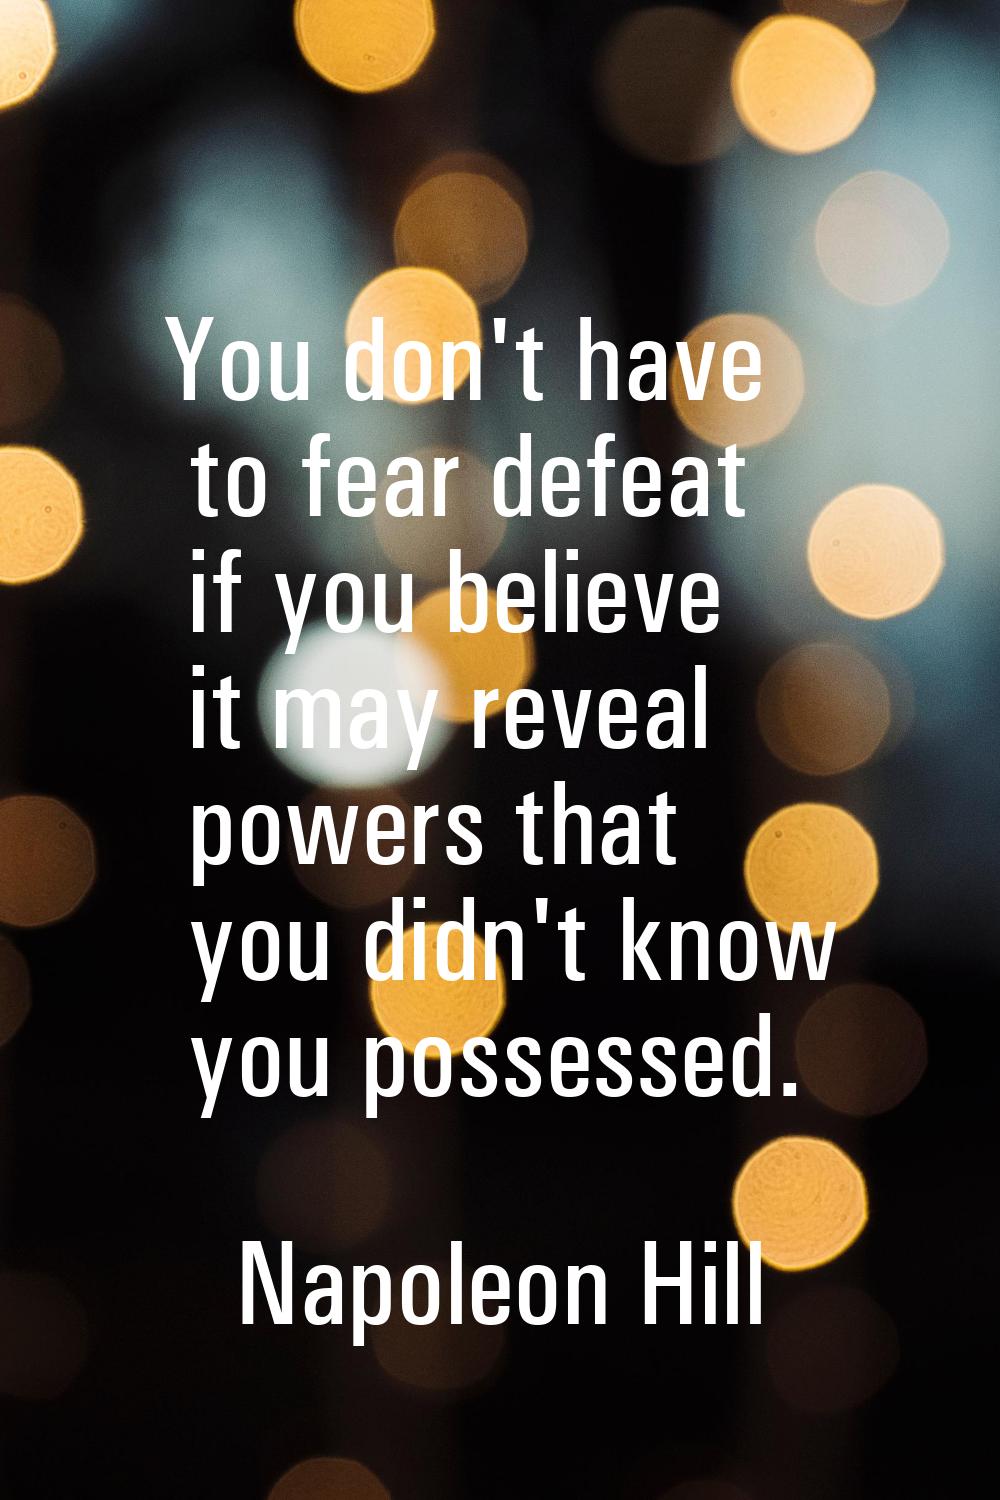 You don't have to fear defeat if you believe it may reveal powers that you didn't know you possesse